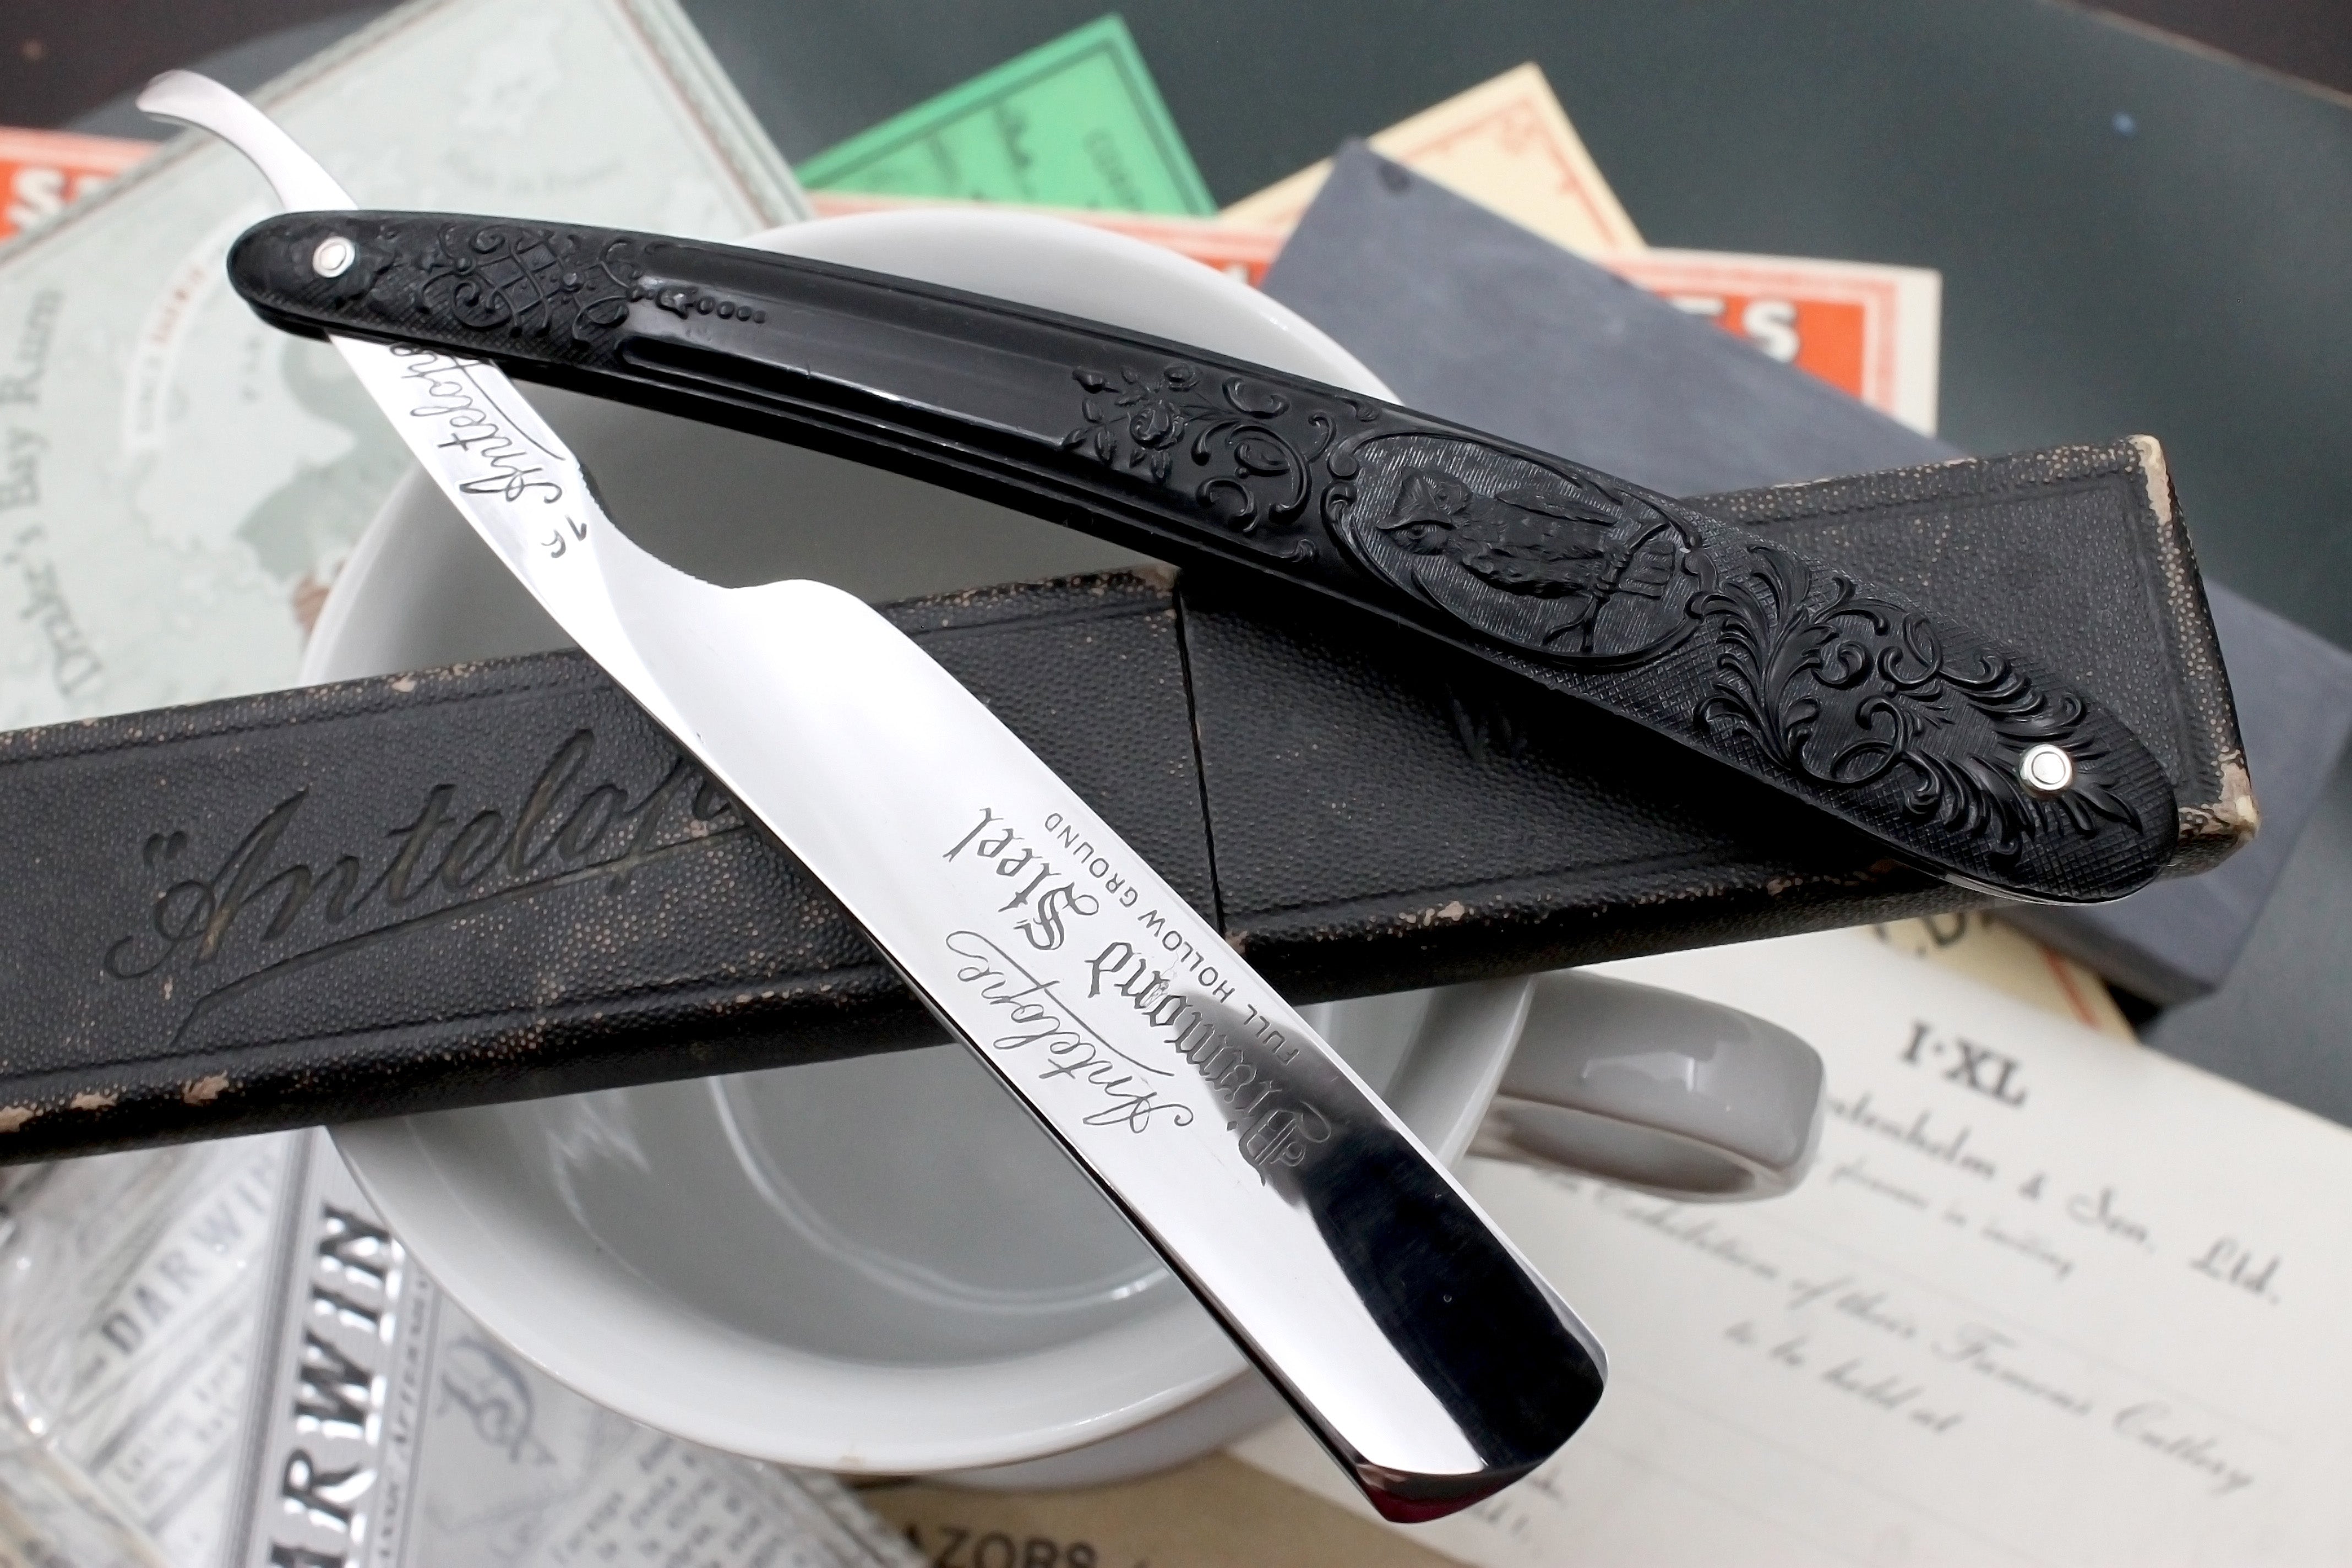 Antelope - 11/16 Full Hollow Blade - Scarce Fancy Molded Scales Straight Razor - Shave Ready